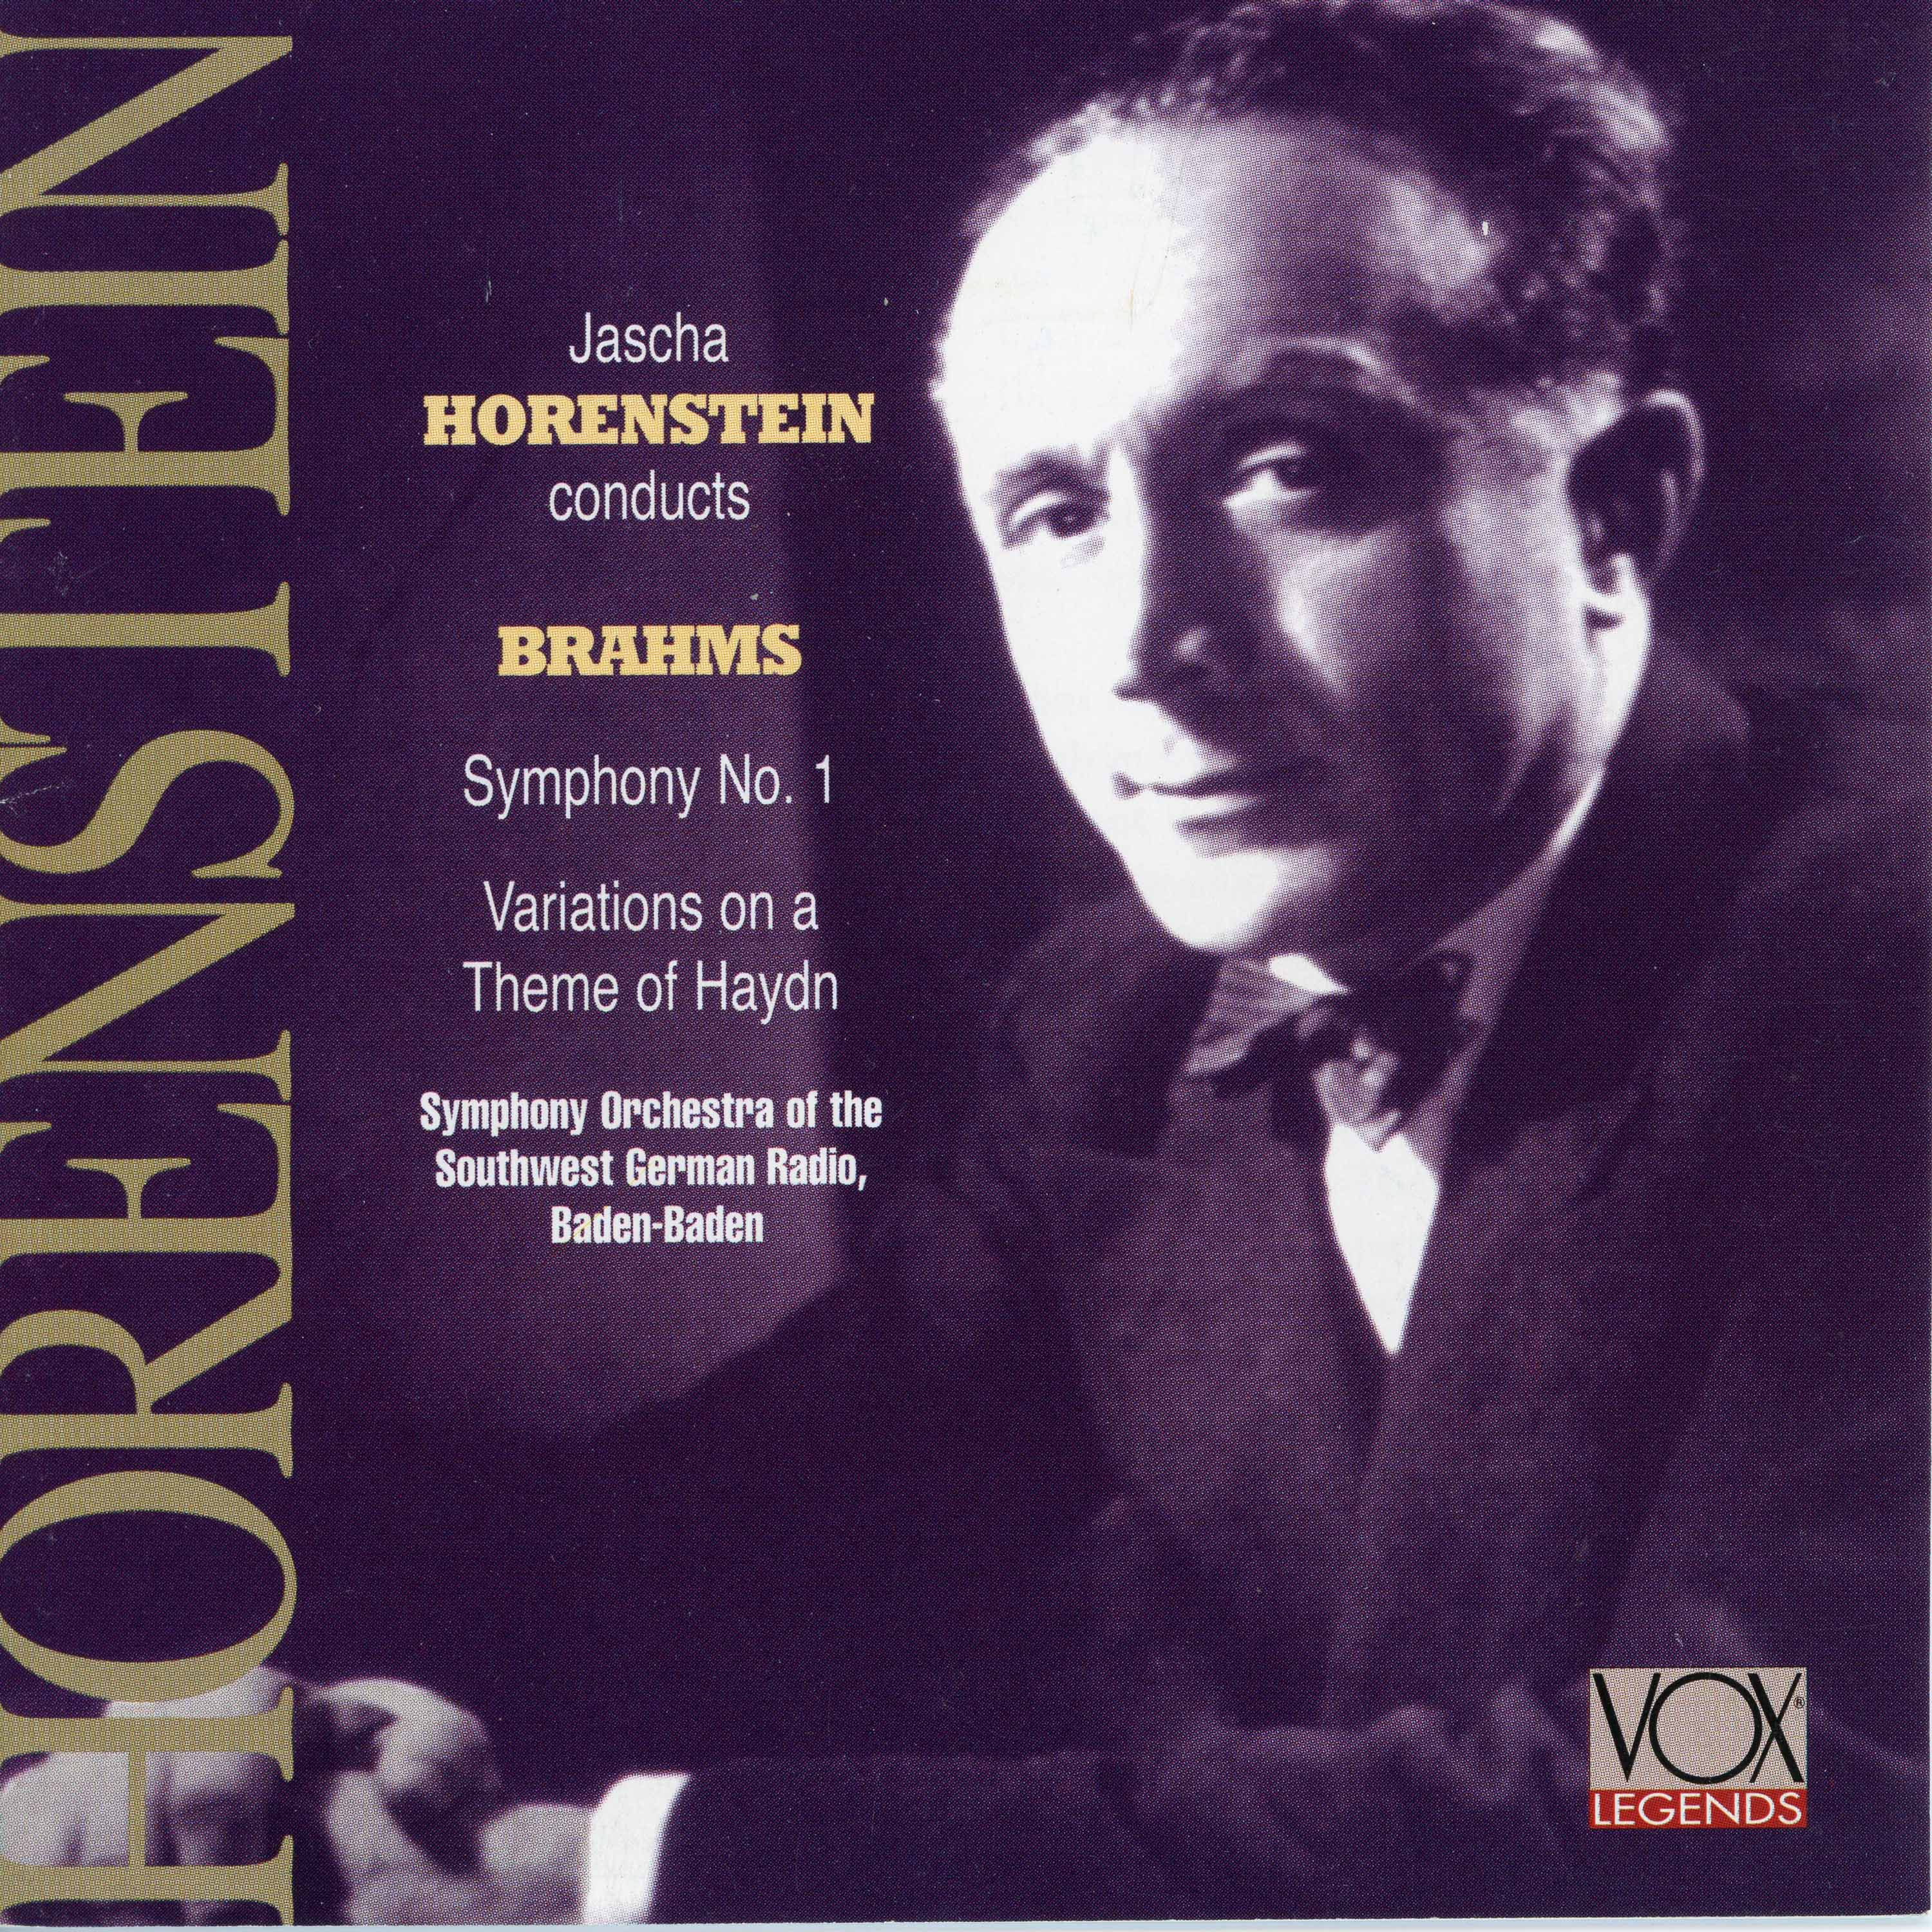 Variations on a Theme by Haydn, Op. 56a " St. Anthony Variations": Variations on a Theme by Haydn, Op. 56a " St. Anthony Variations": Var. 2, Piu vivace